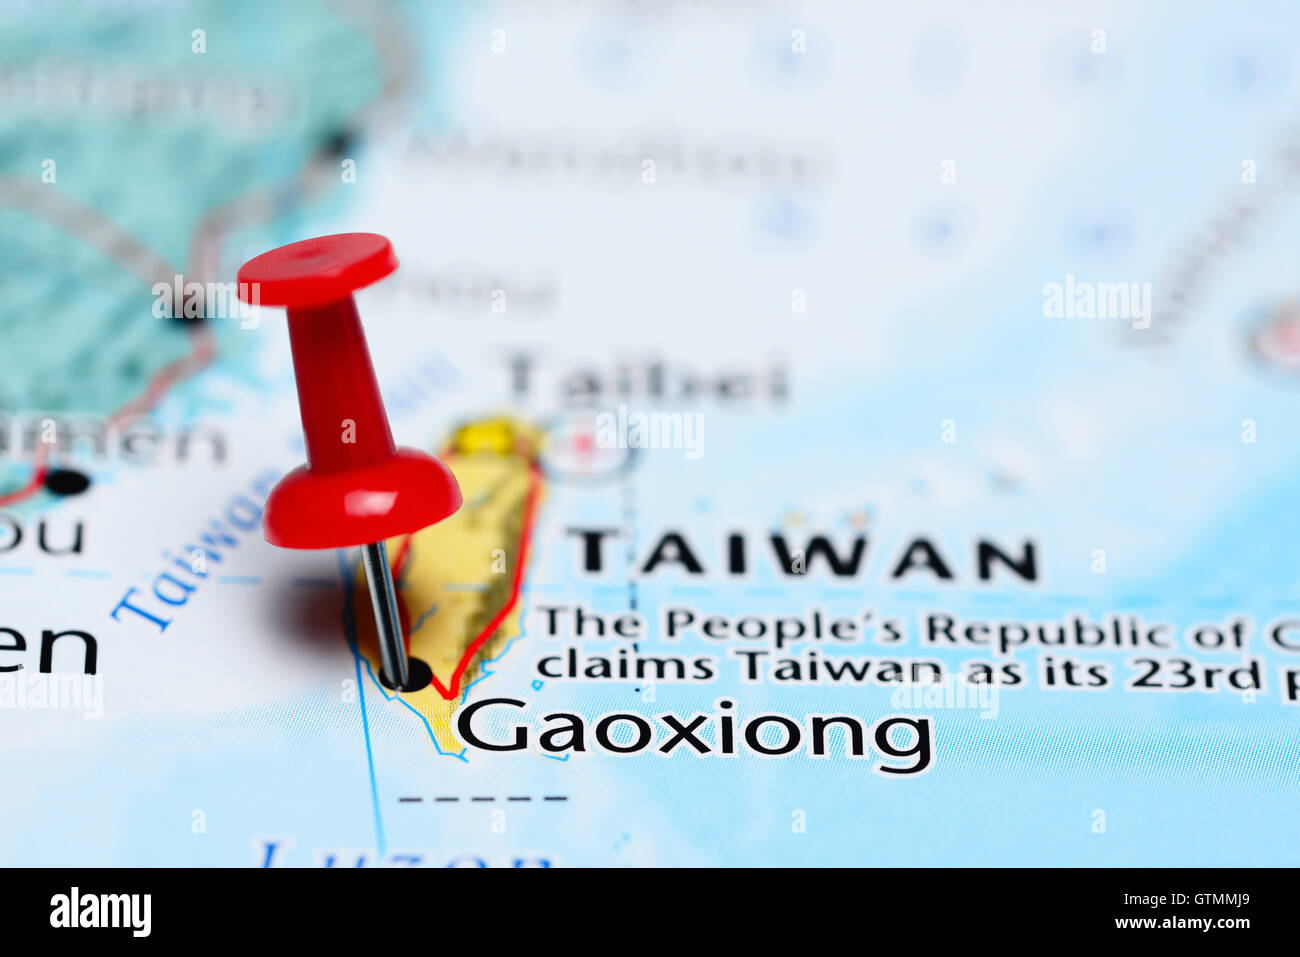 Gaoxiong pinned on a map of Taiwan Stock Photo